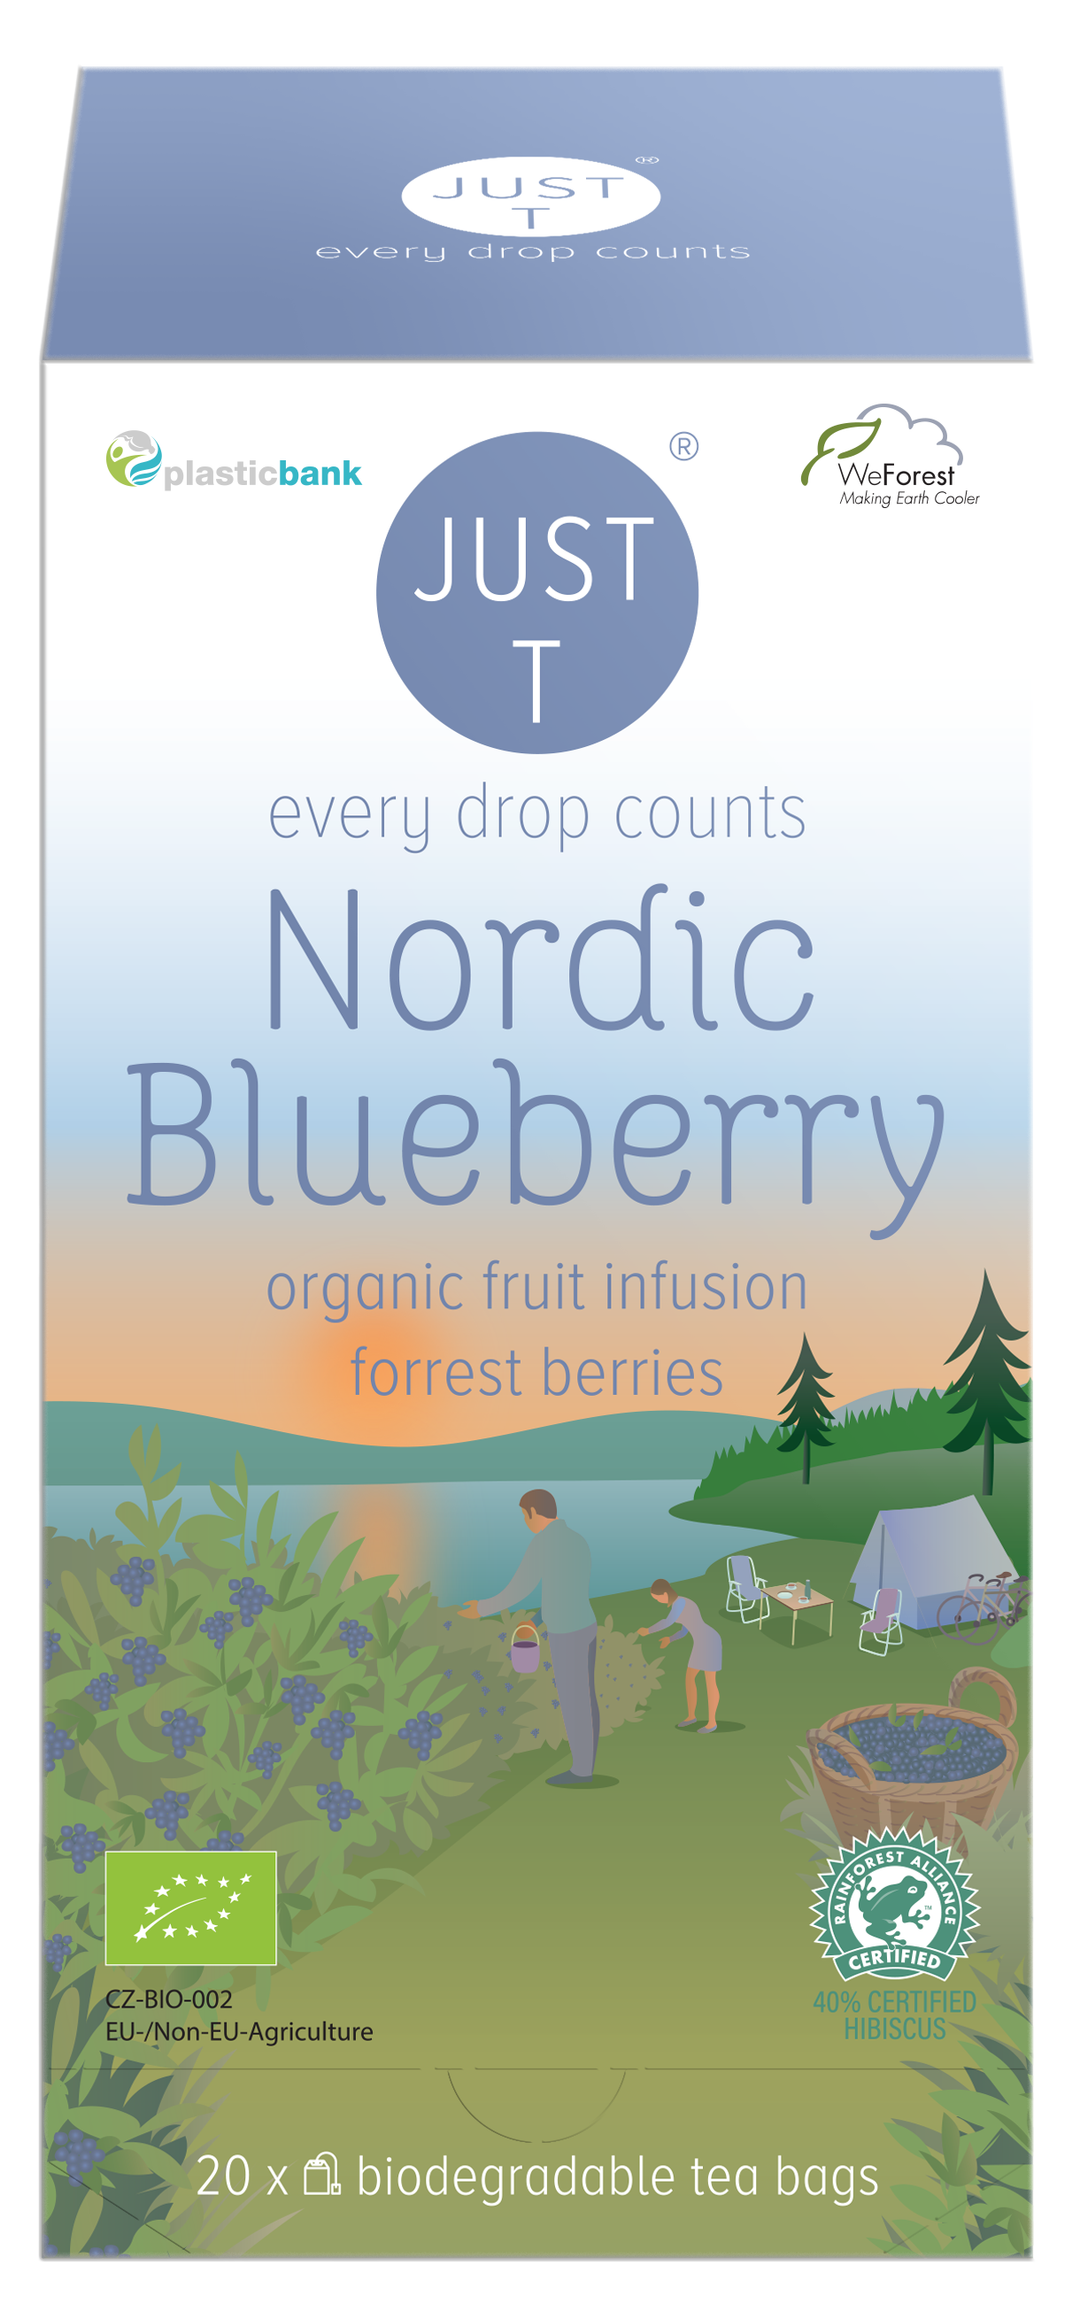 Just T Organic Nordic Blueberry Tea - 20 Bags